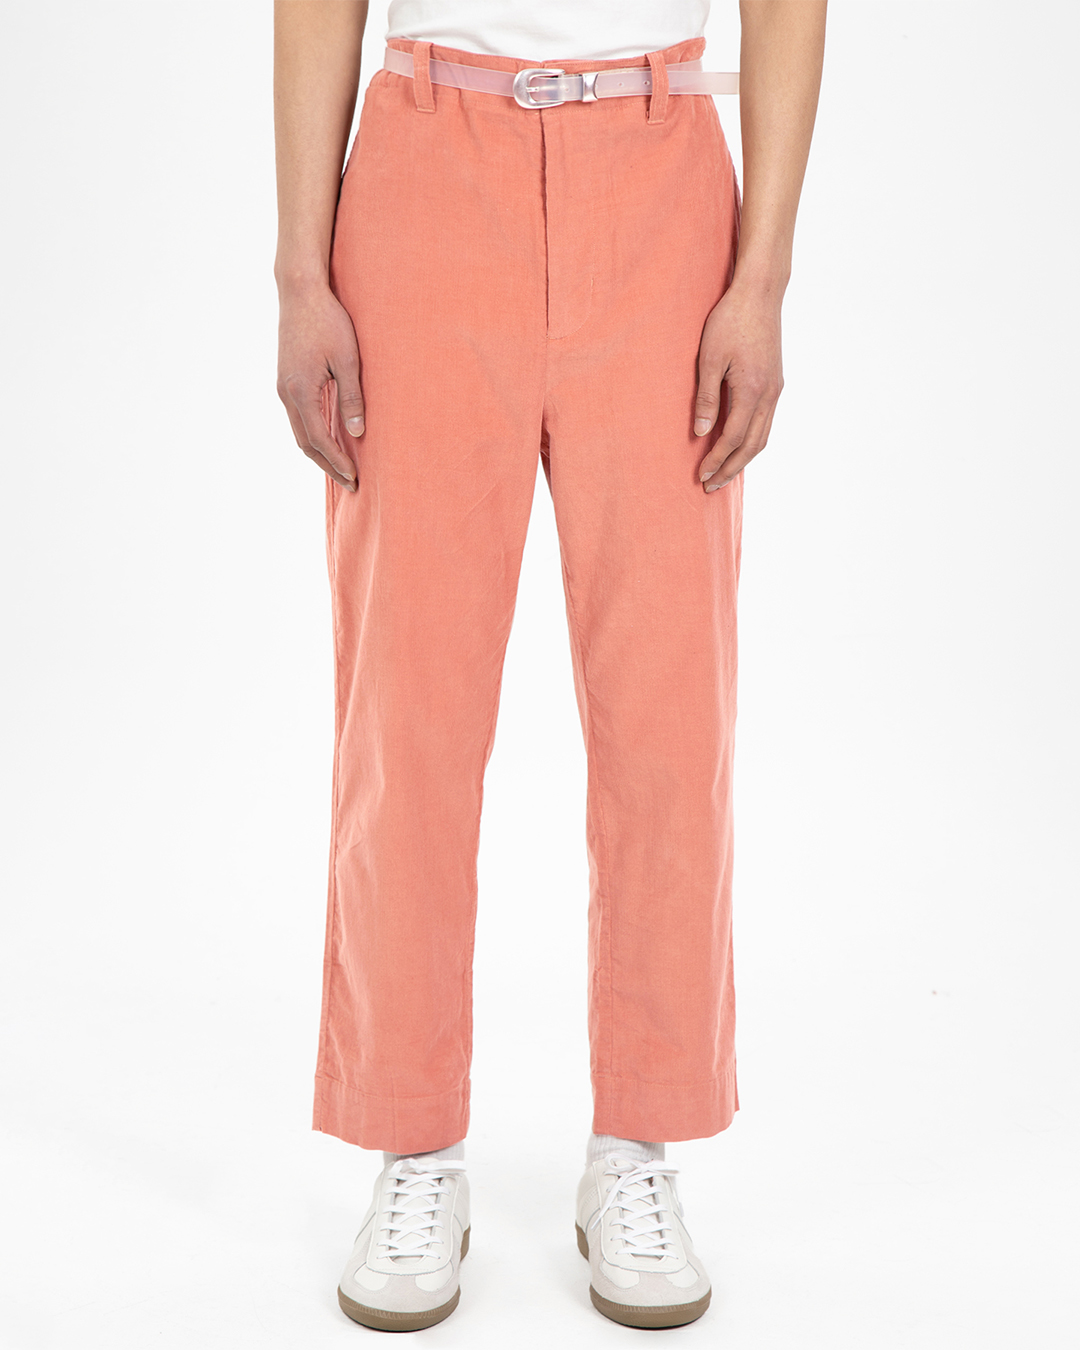 SUMMER CORDUROY FRENCH WORK PANTS (PINK)